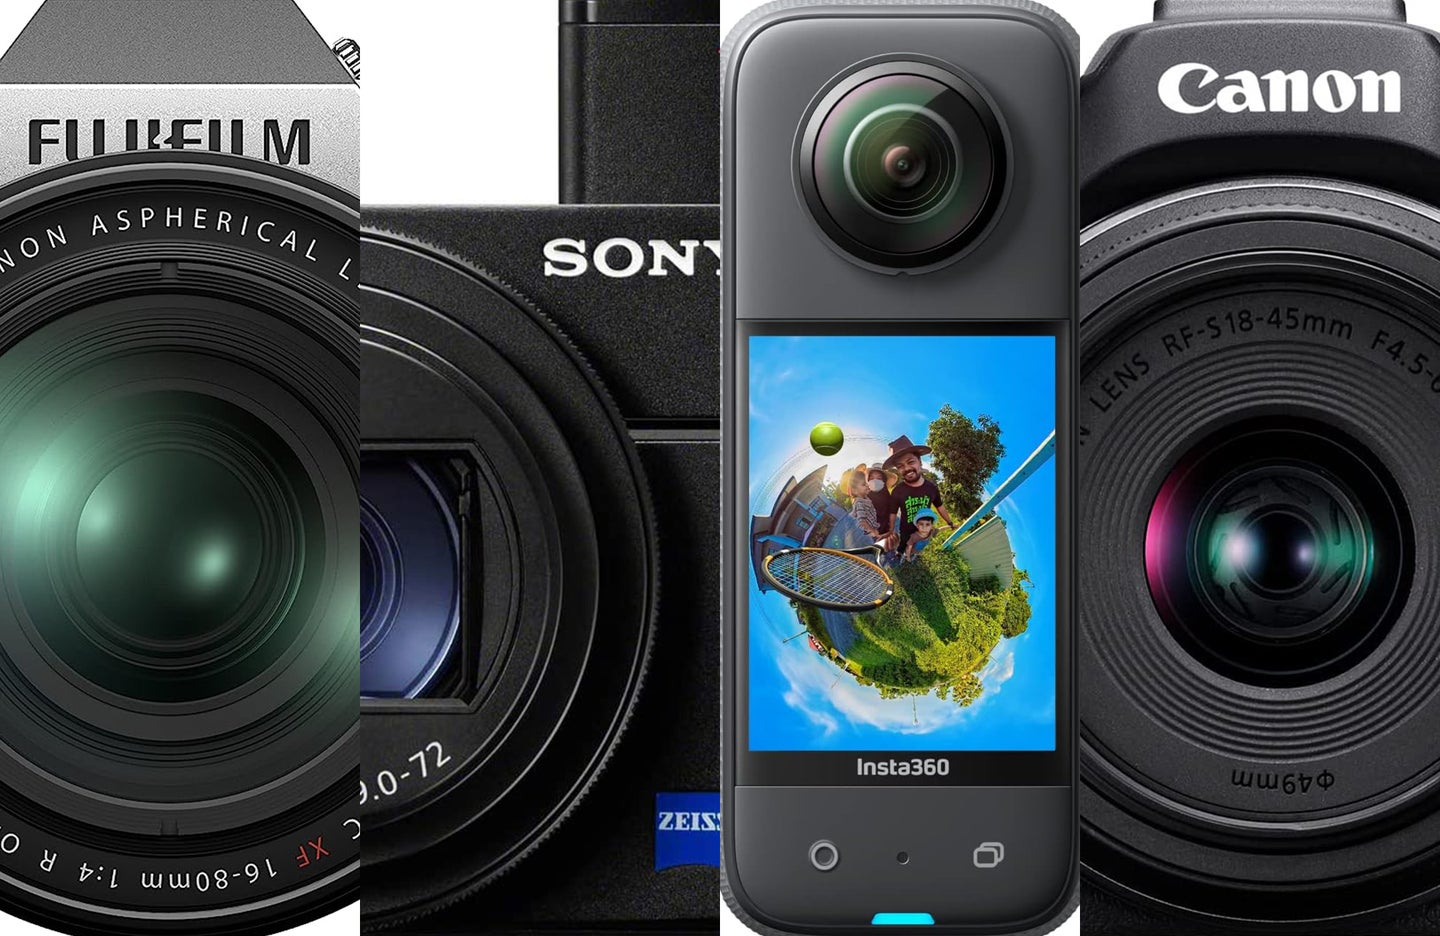 The best travel cameras, including a Sony compact, Fujifilm, Insta260, and Canon camera.